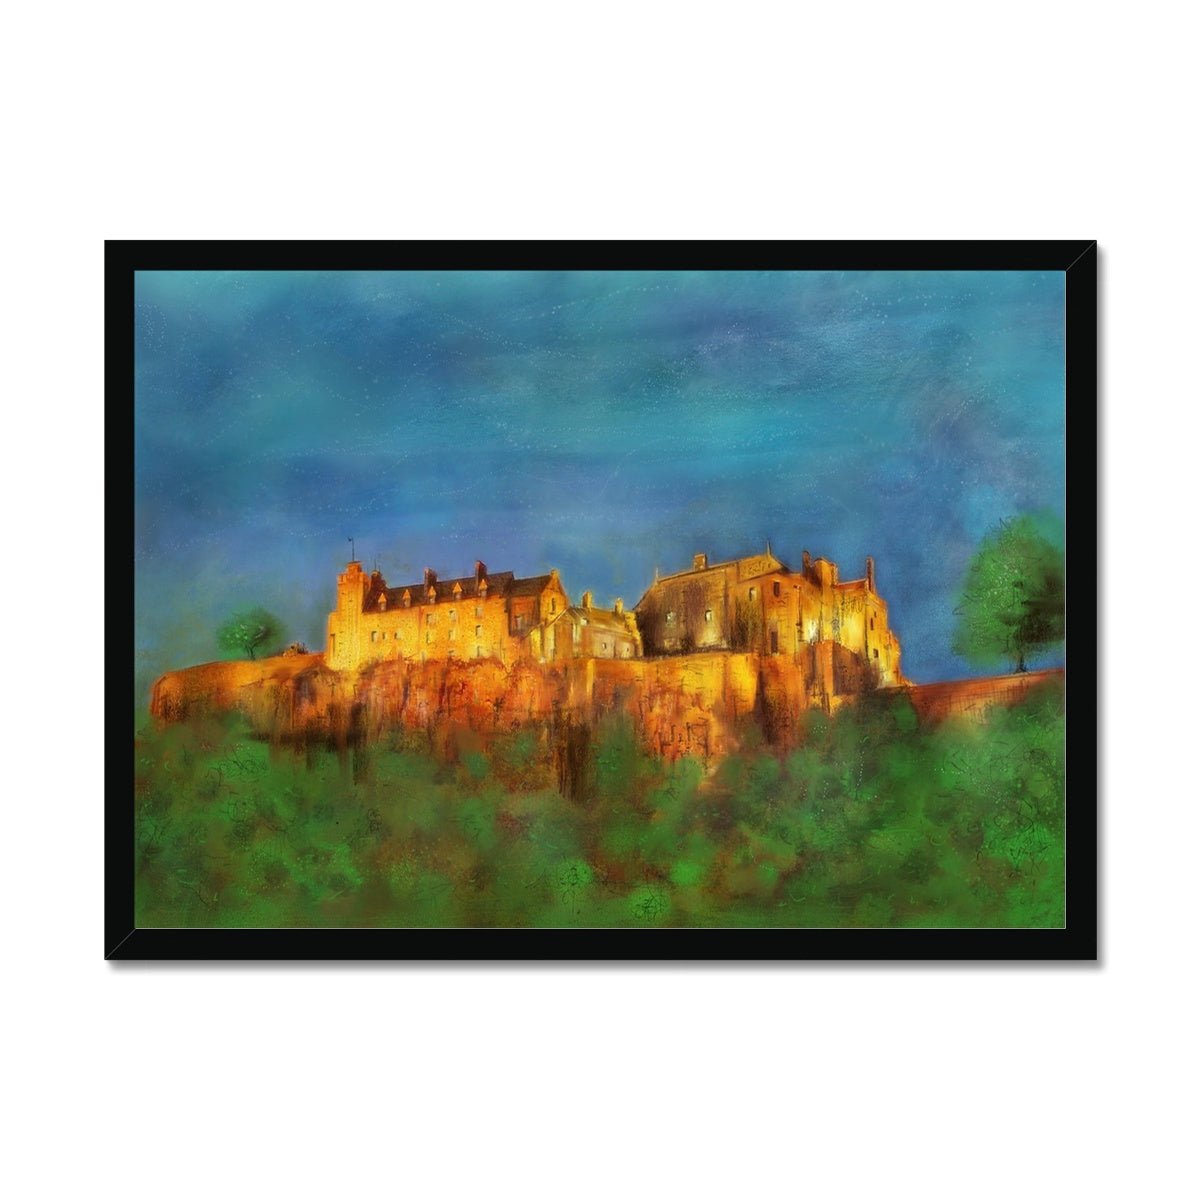 Stirling Castle Painting | Framed Prints From Scotland-Framed Prints-Historic & Iconic Scotland Art Gallery-A2 Landscape-Black Frame-Paintings, Prints, Homeware, Art Gifts From Scotland By Scottish Artist Kevin Hunter